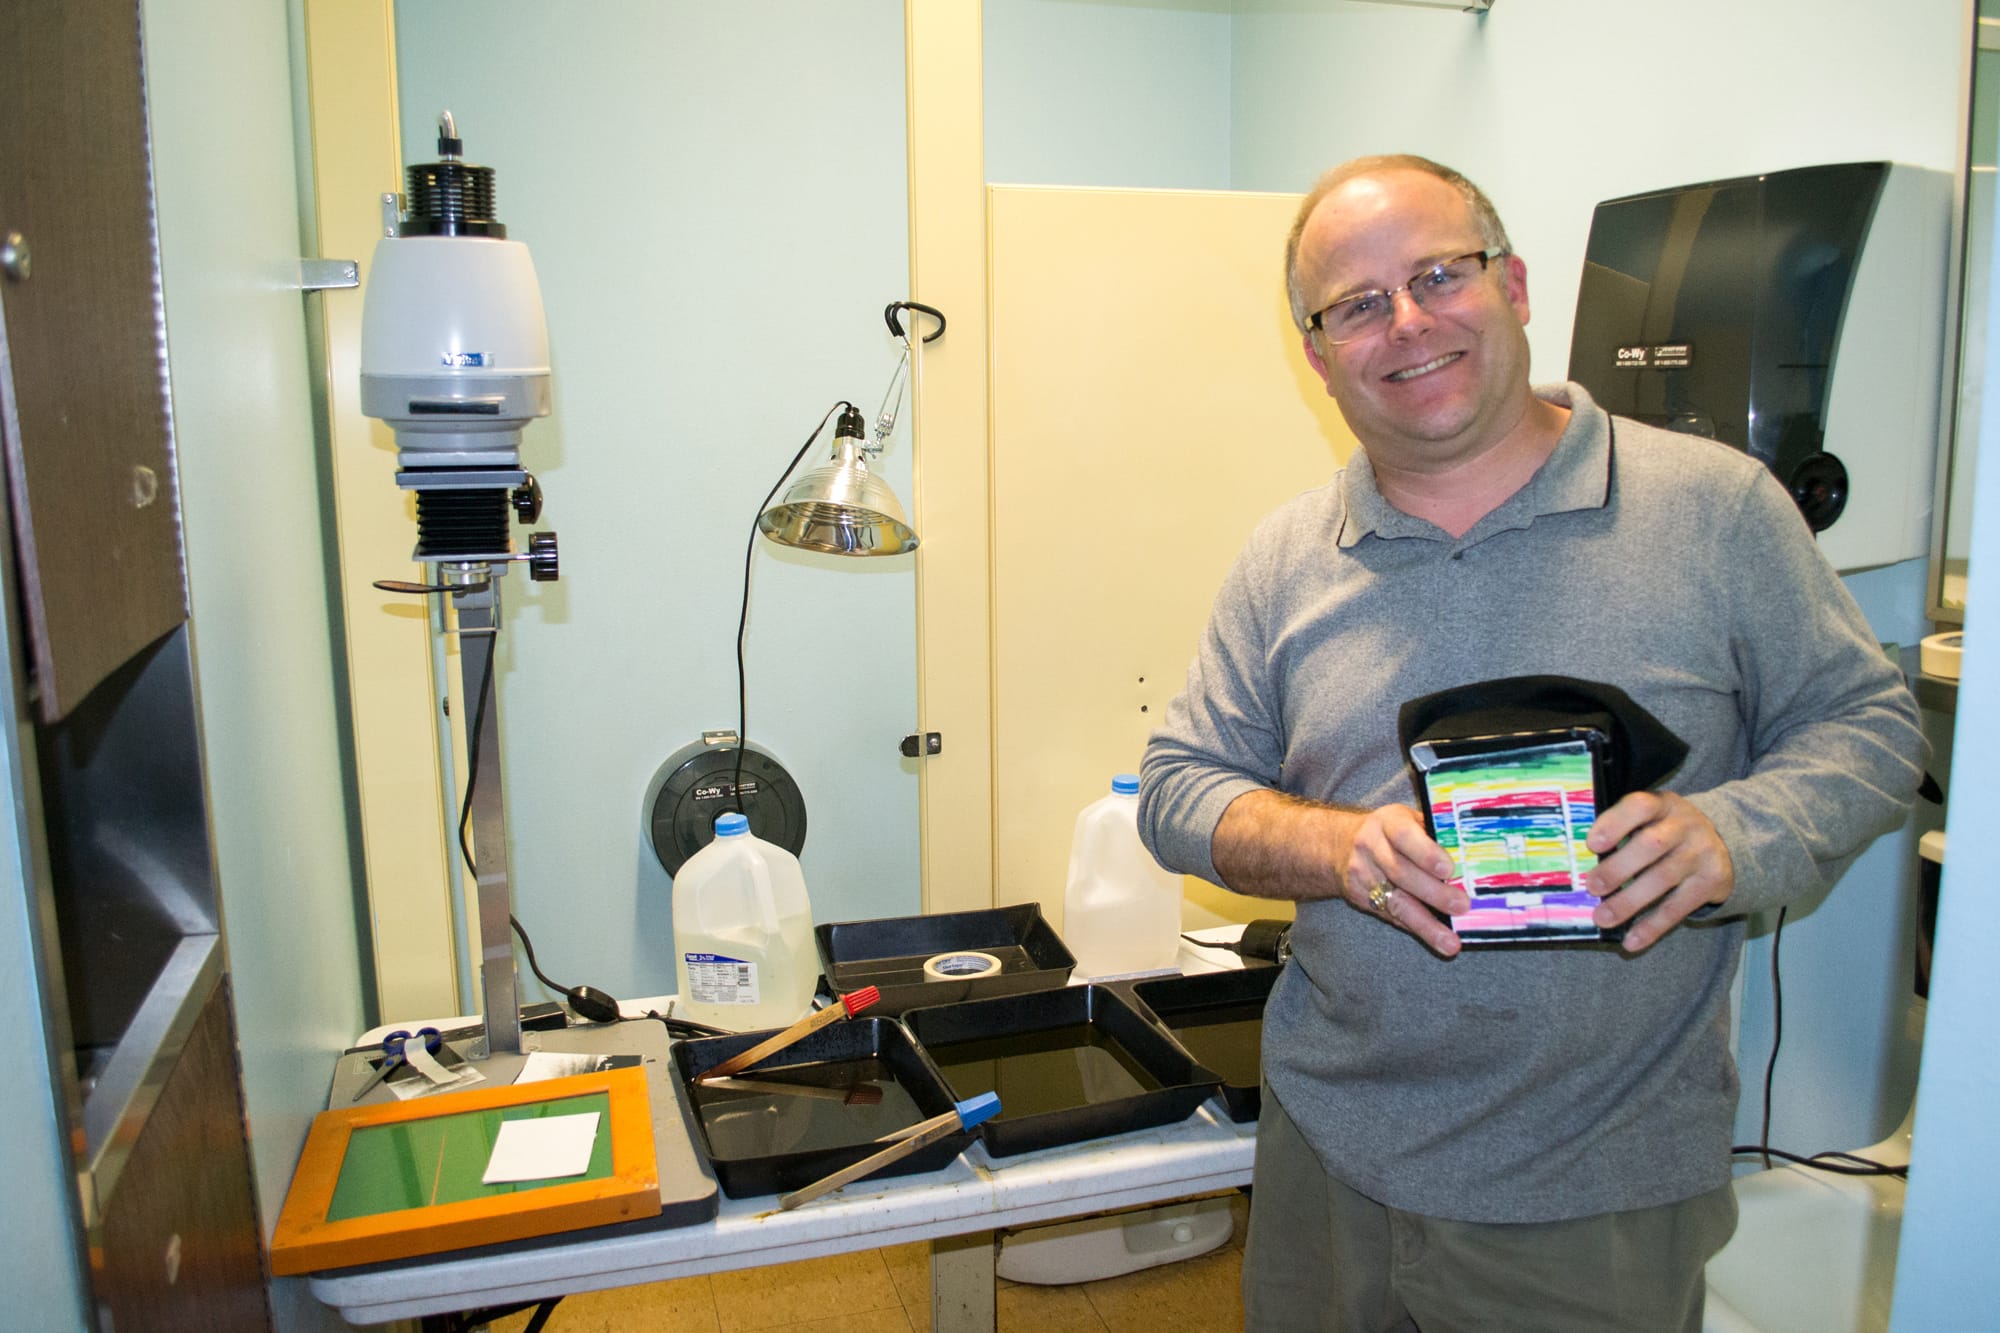 Ridgefield: Photography teacher Mark Cook shows off a homemade pinhole camera and his makeshift darkroom in an unused faculty restroom at Ridgefield High School.